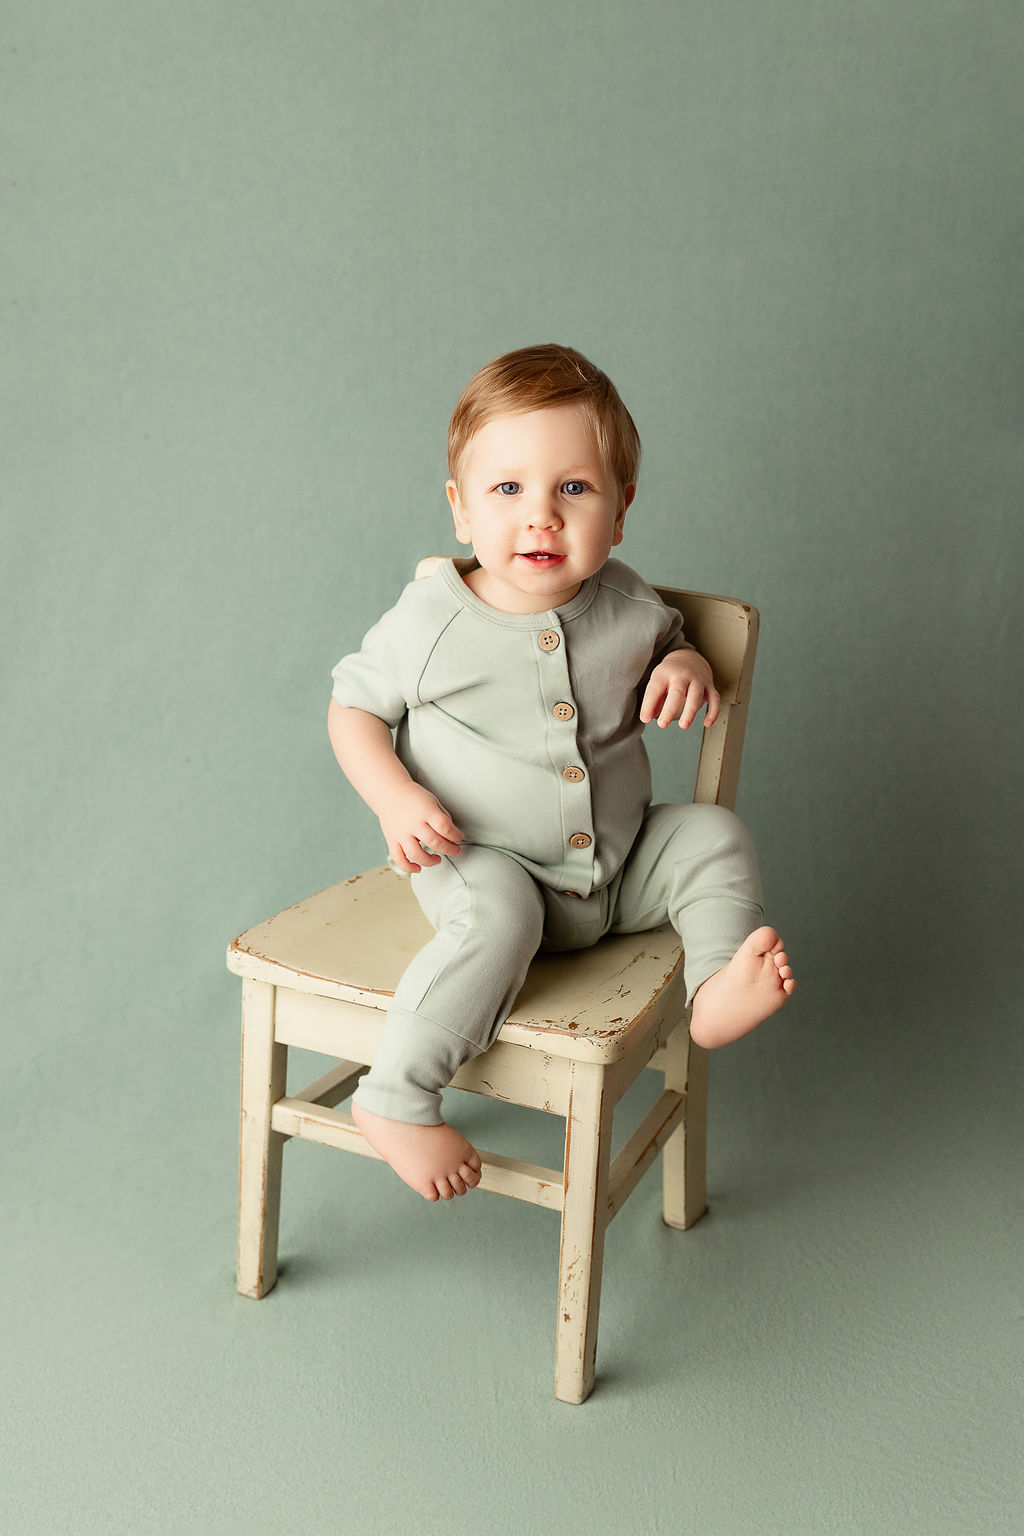 A toddler boy in a green onesie sits on a wooden chair